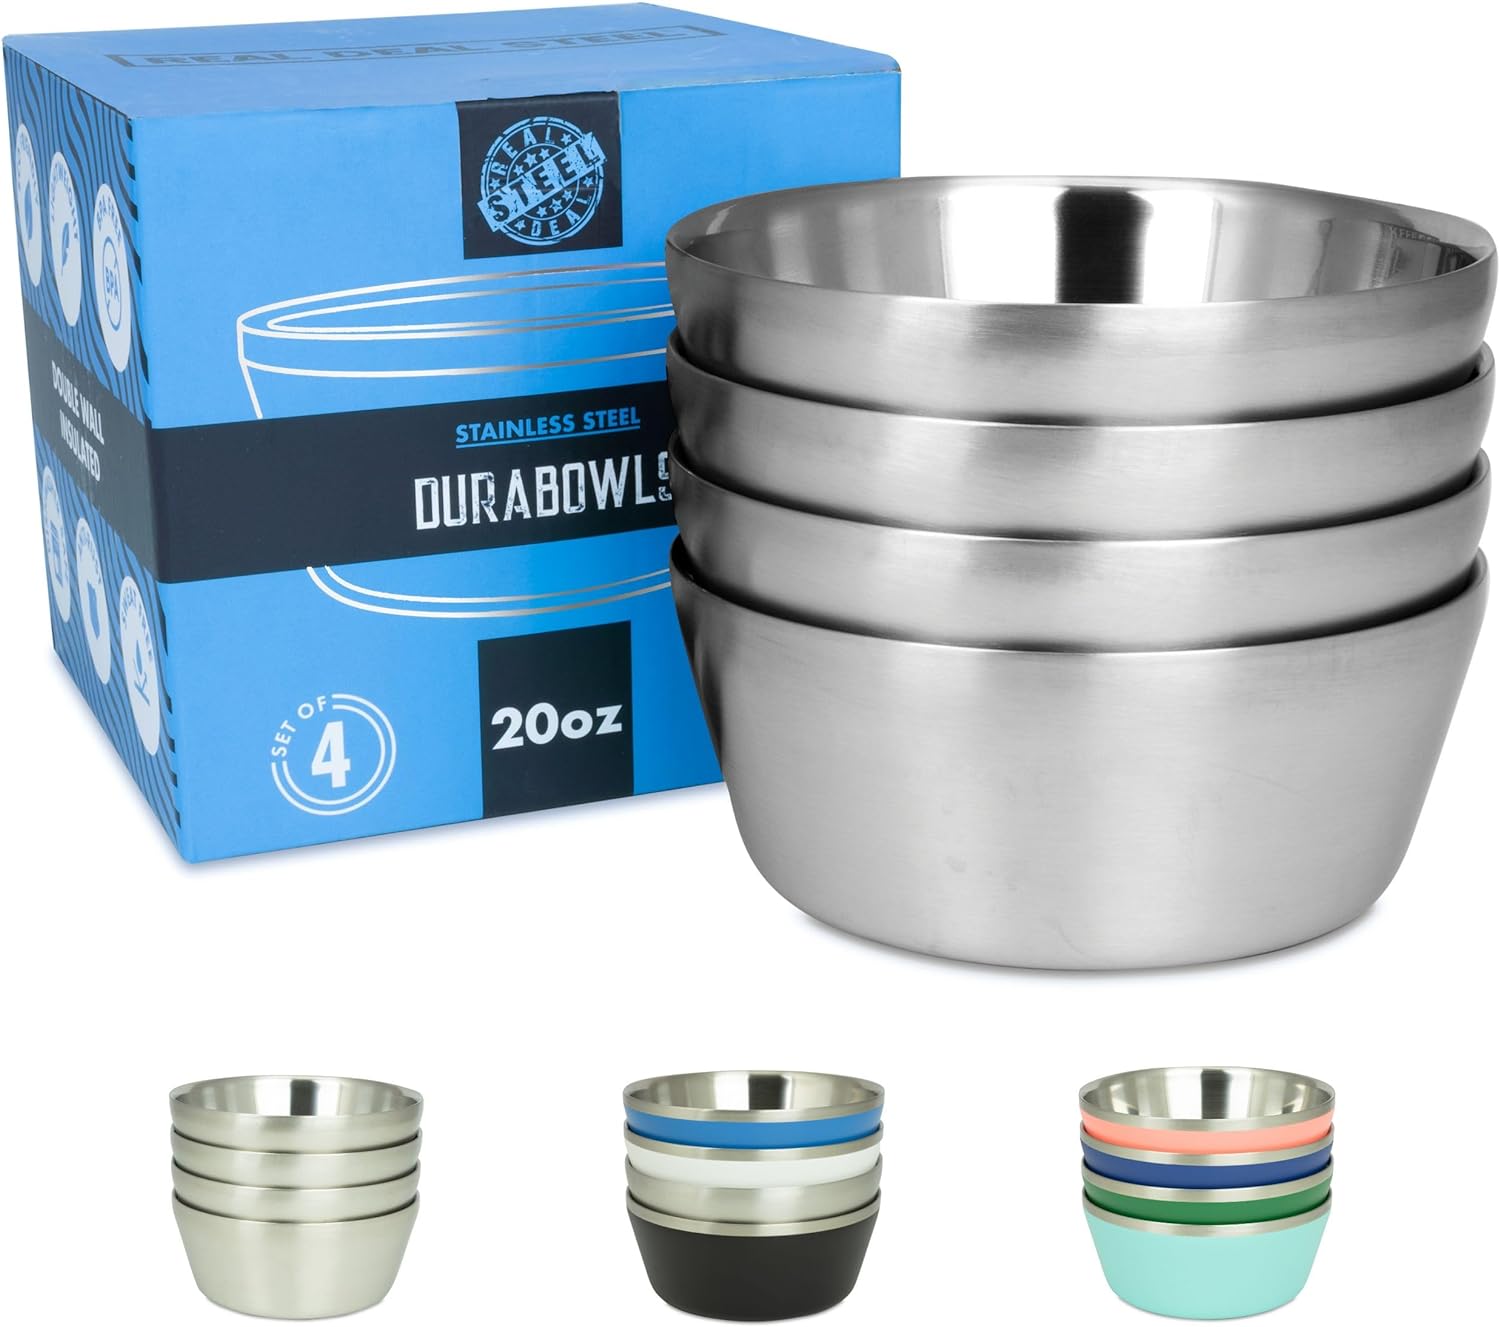 DURABOWLS 20 oz Insulated Stainless Steel Bowls (Stainless Steel